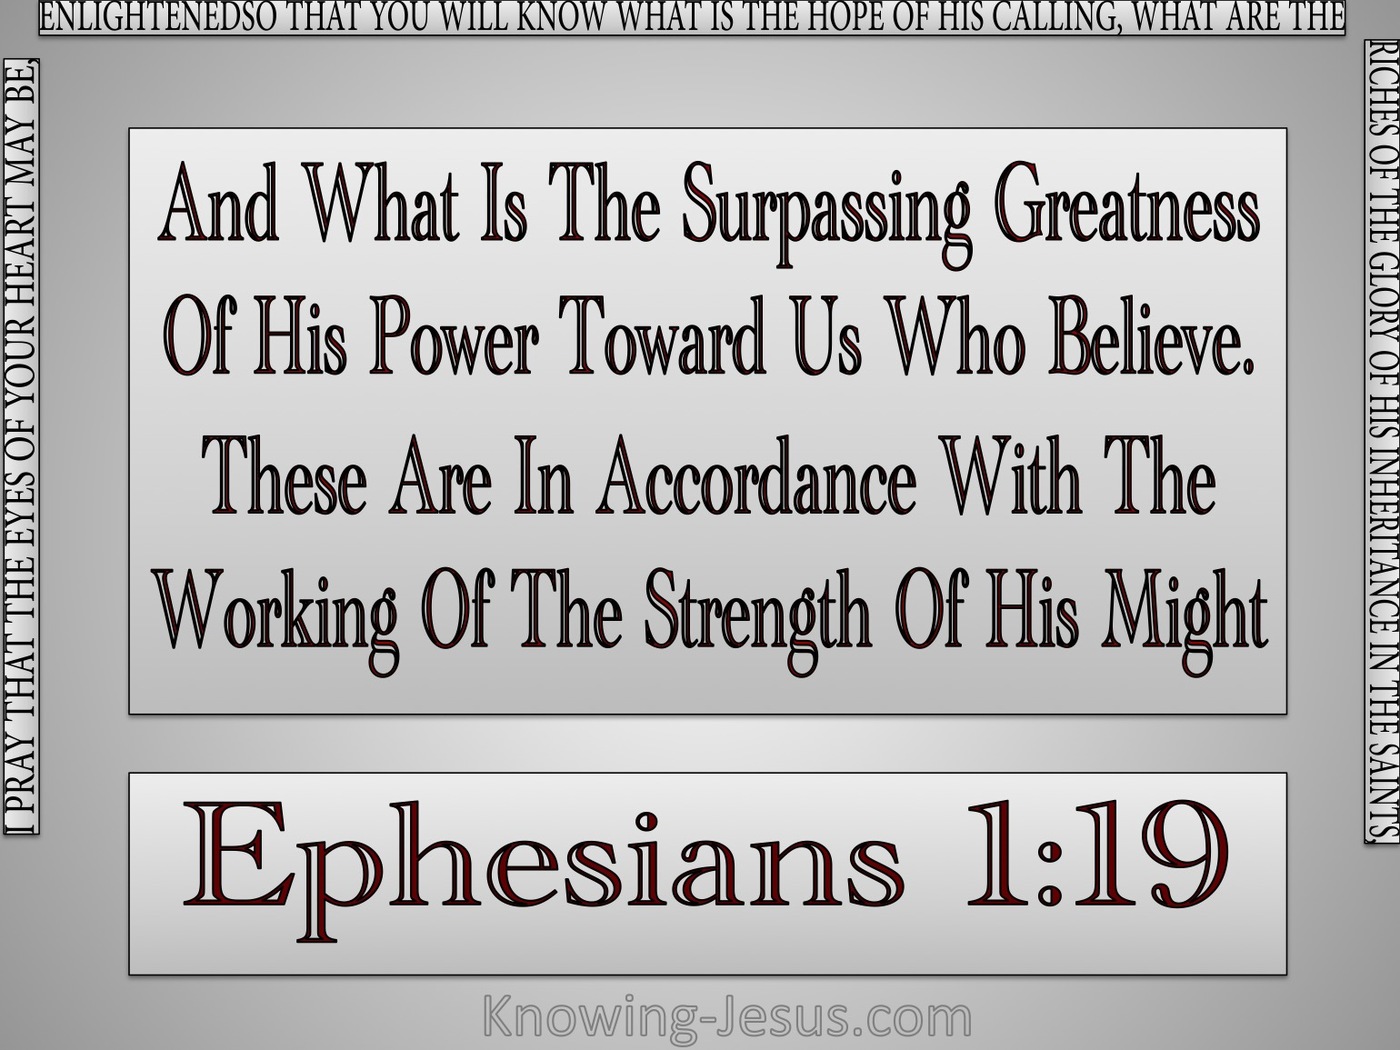 Ephesians 1:19 The Surpassing Greatness Of His Power (gray)